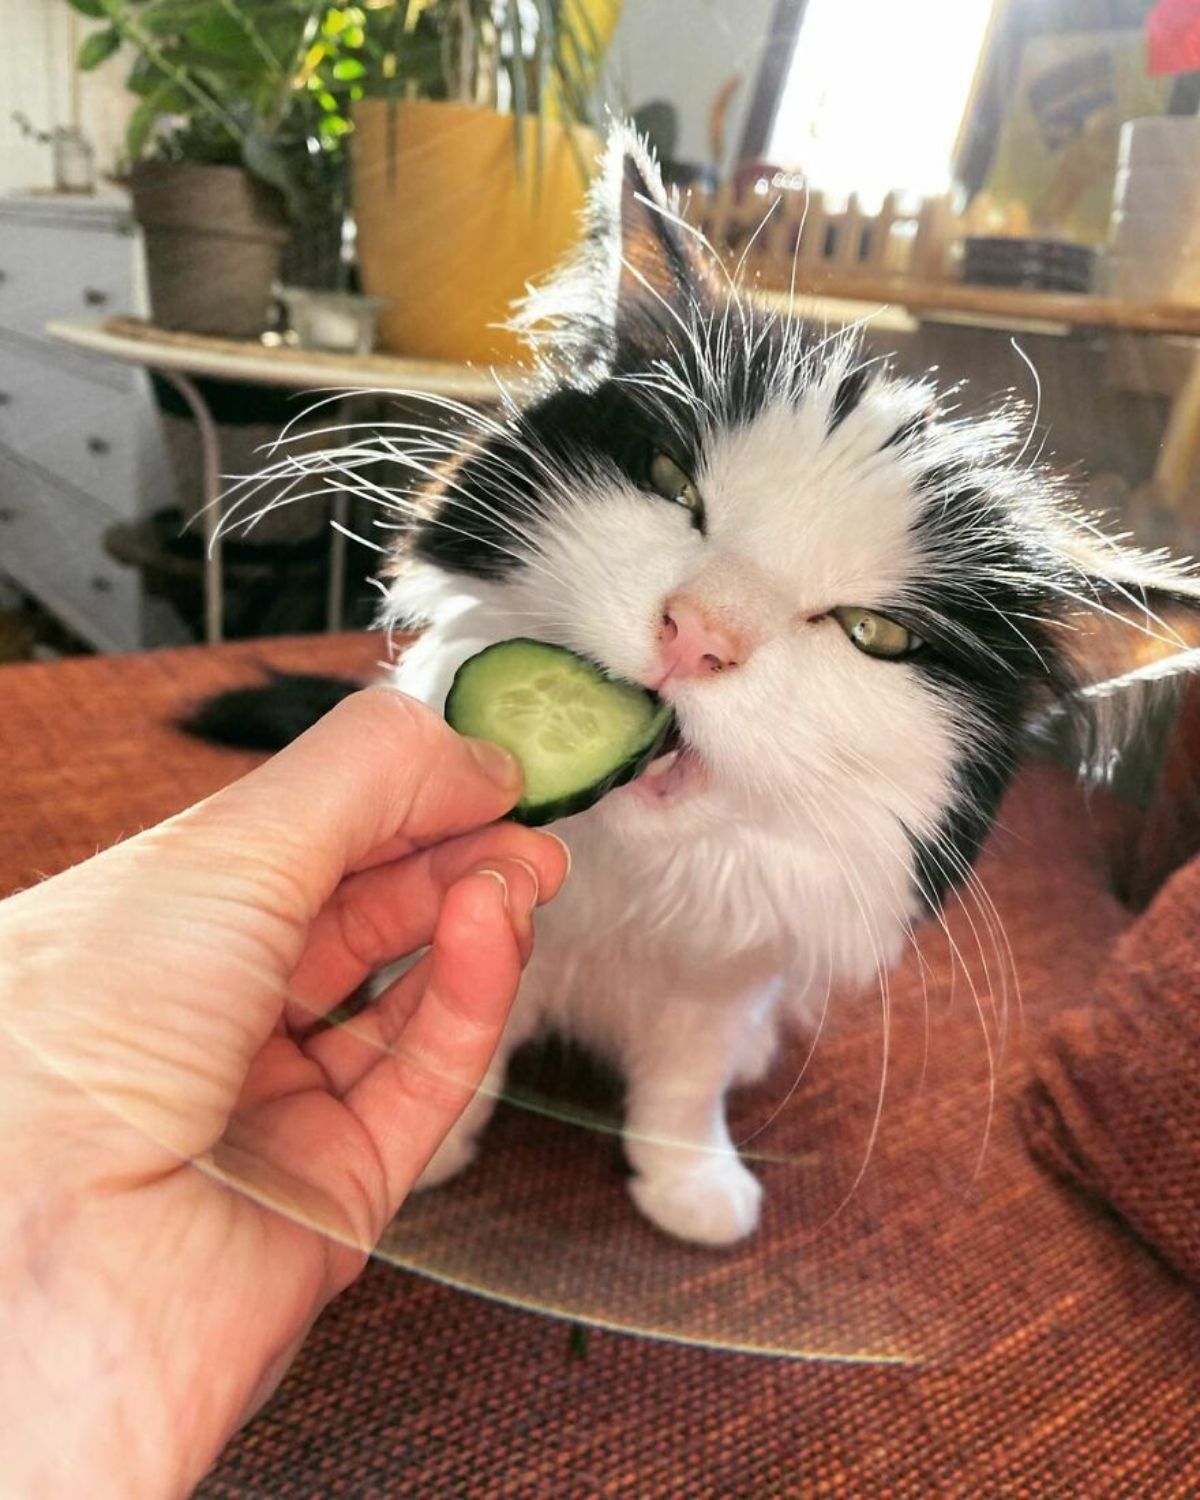 black and white fluffy cat biting into a slice of cucumber someone is holding out